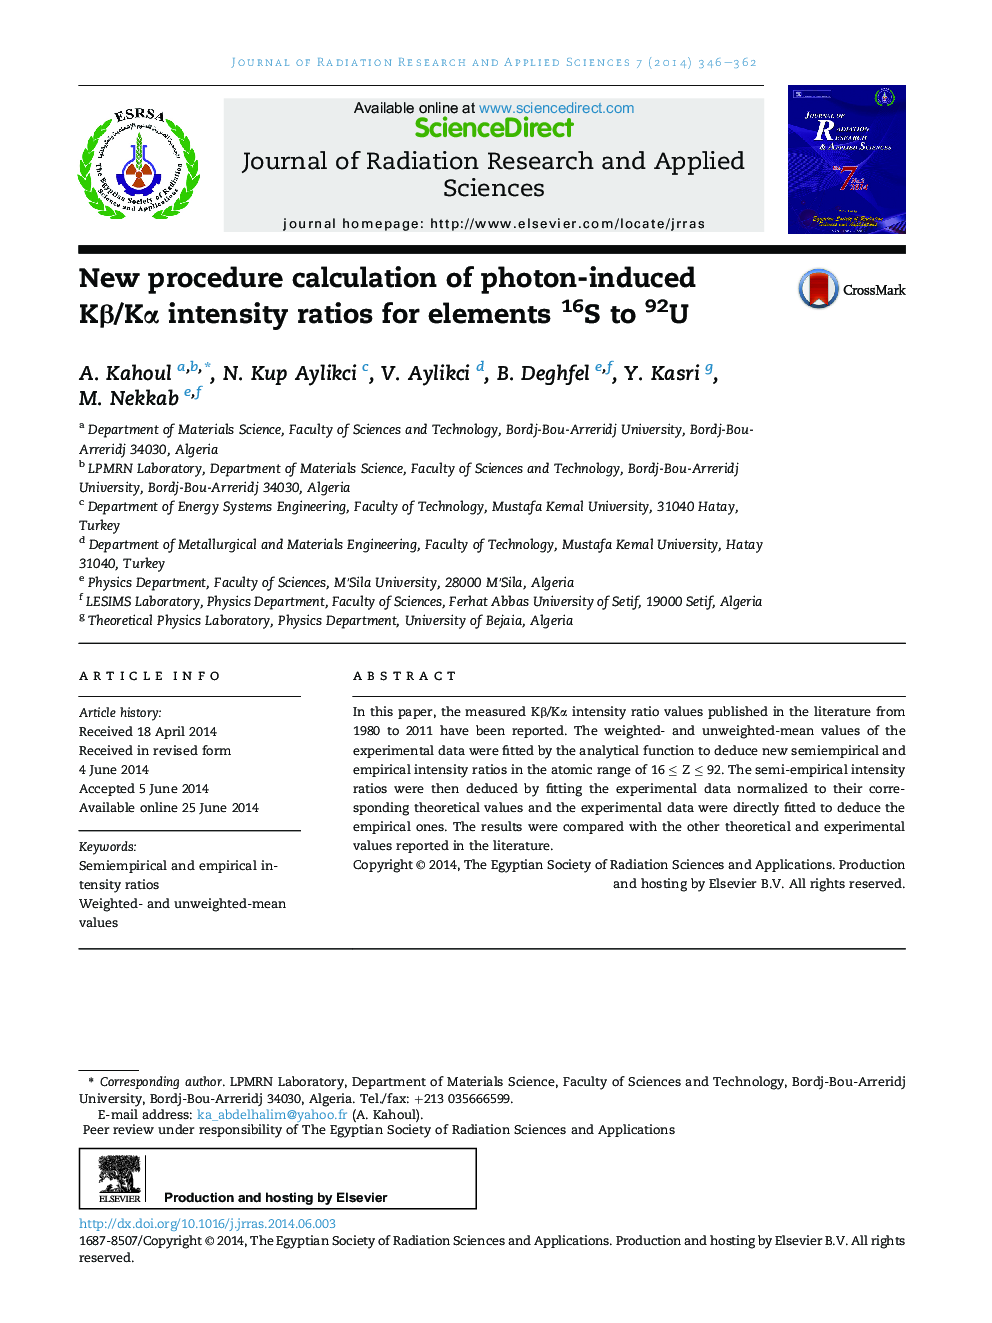 New procedure calculation of photon-induced Kβ/Kα intensity ratios for elements 16S to 92U 